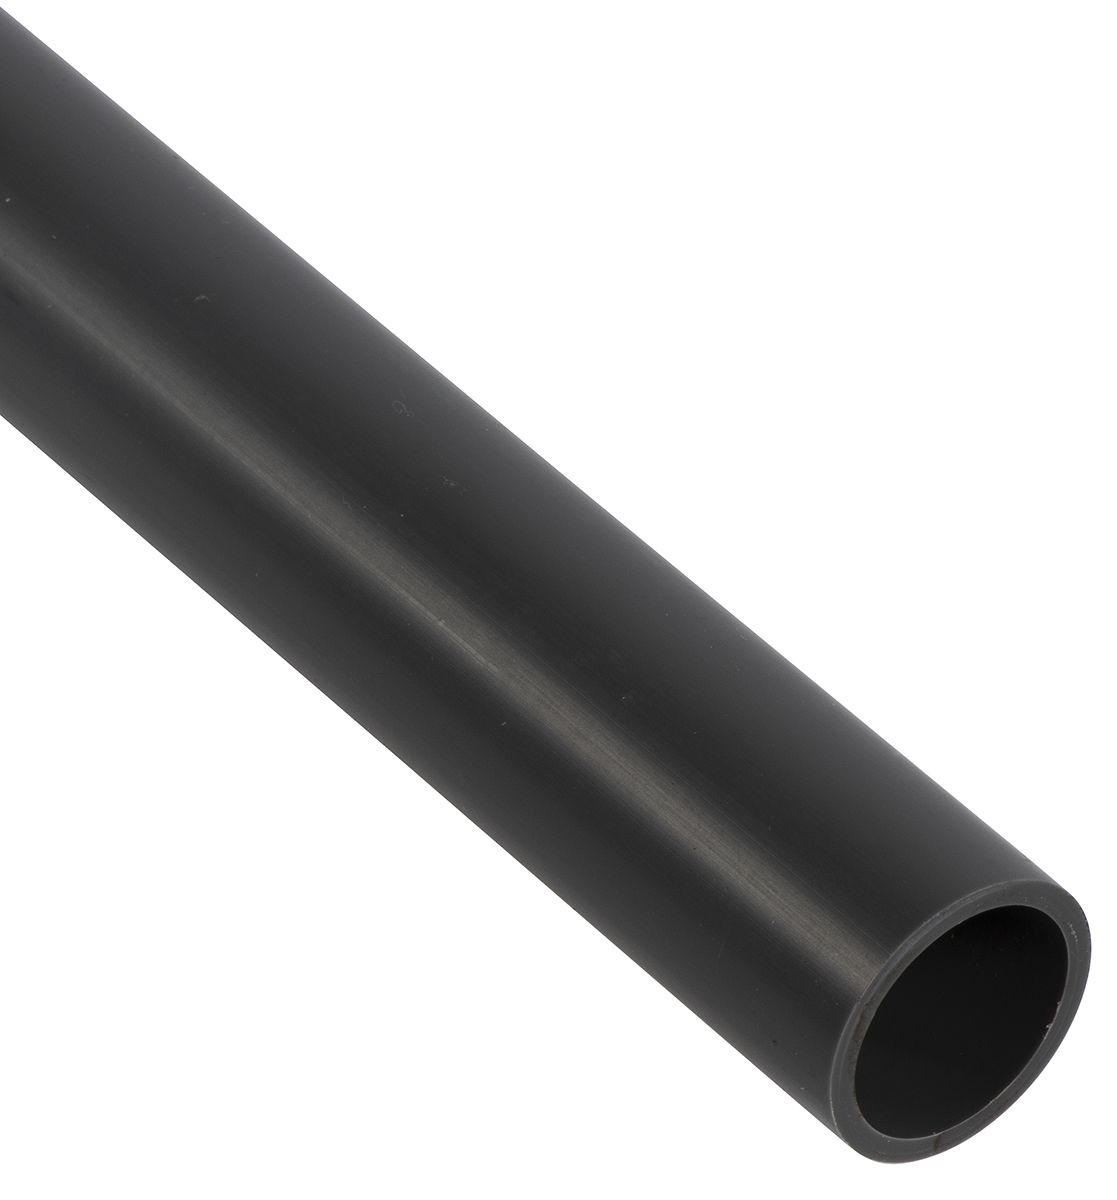 Georg Fischer PVC Pipe, 2m long x 60mm OD, 4.5mm Wall Thickness